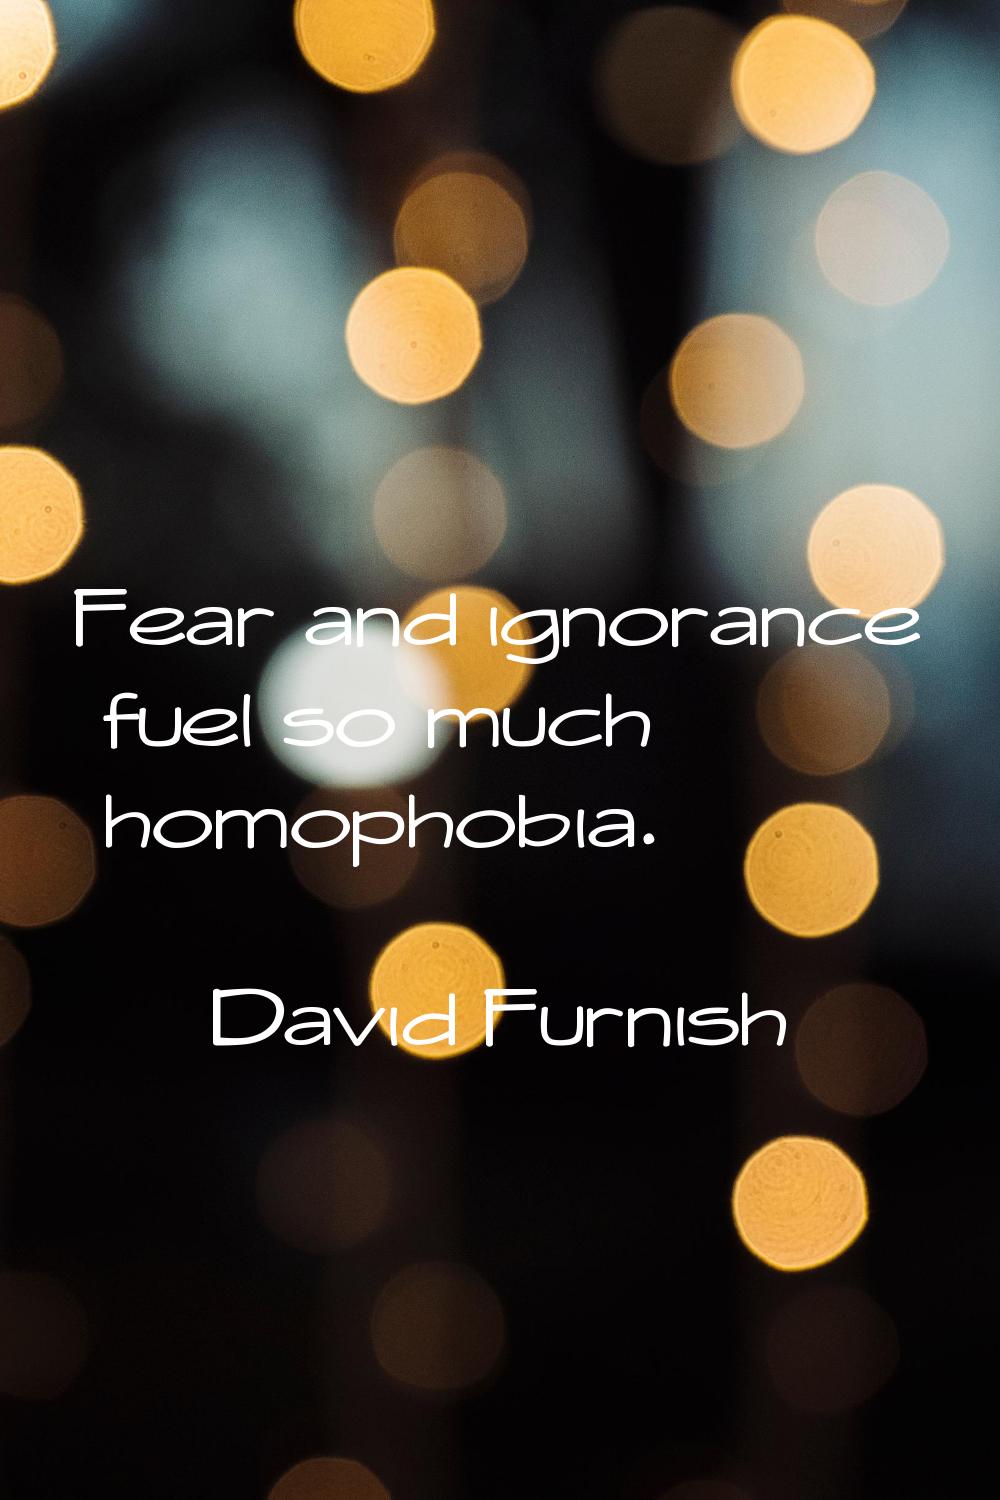 Fear and ignorance fuel so much homophobia.